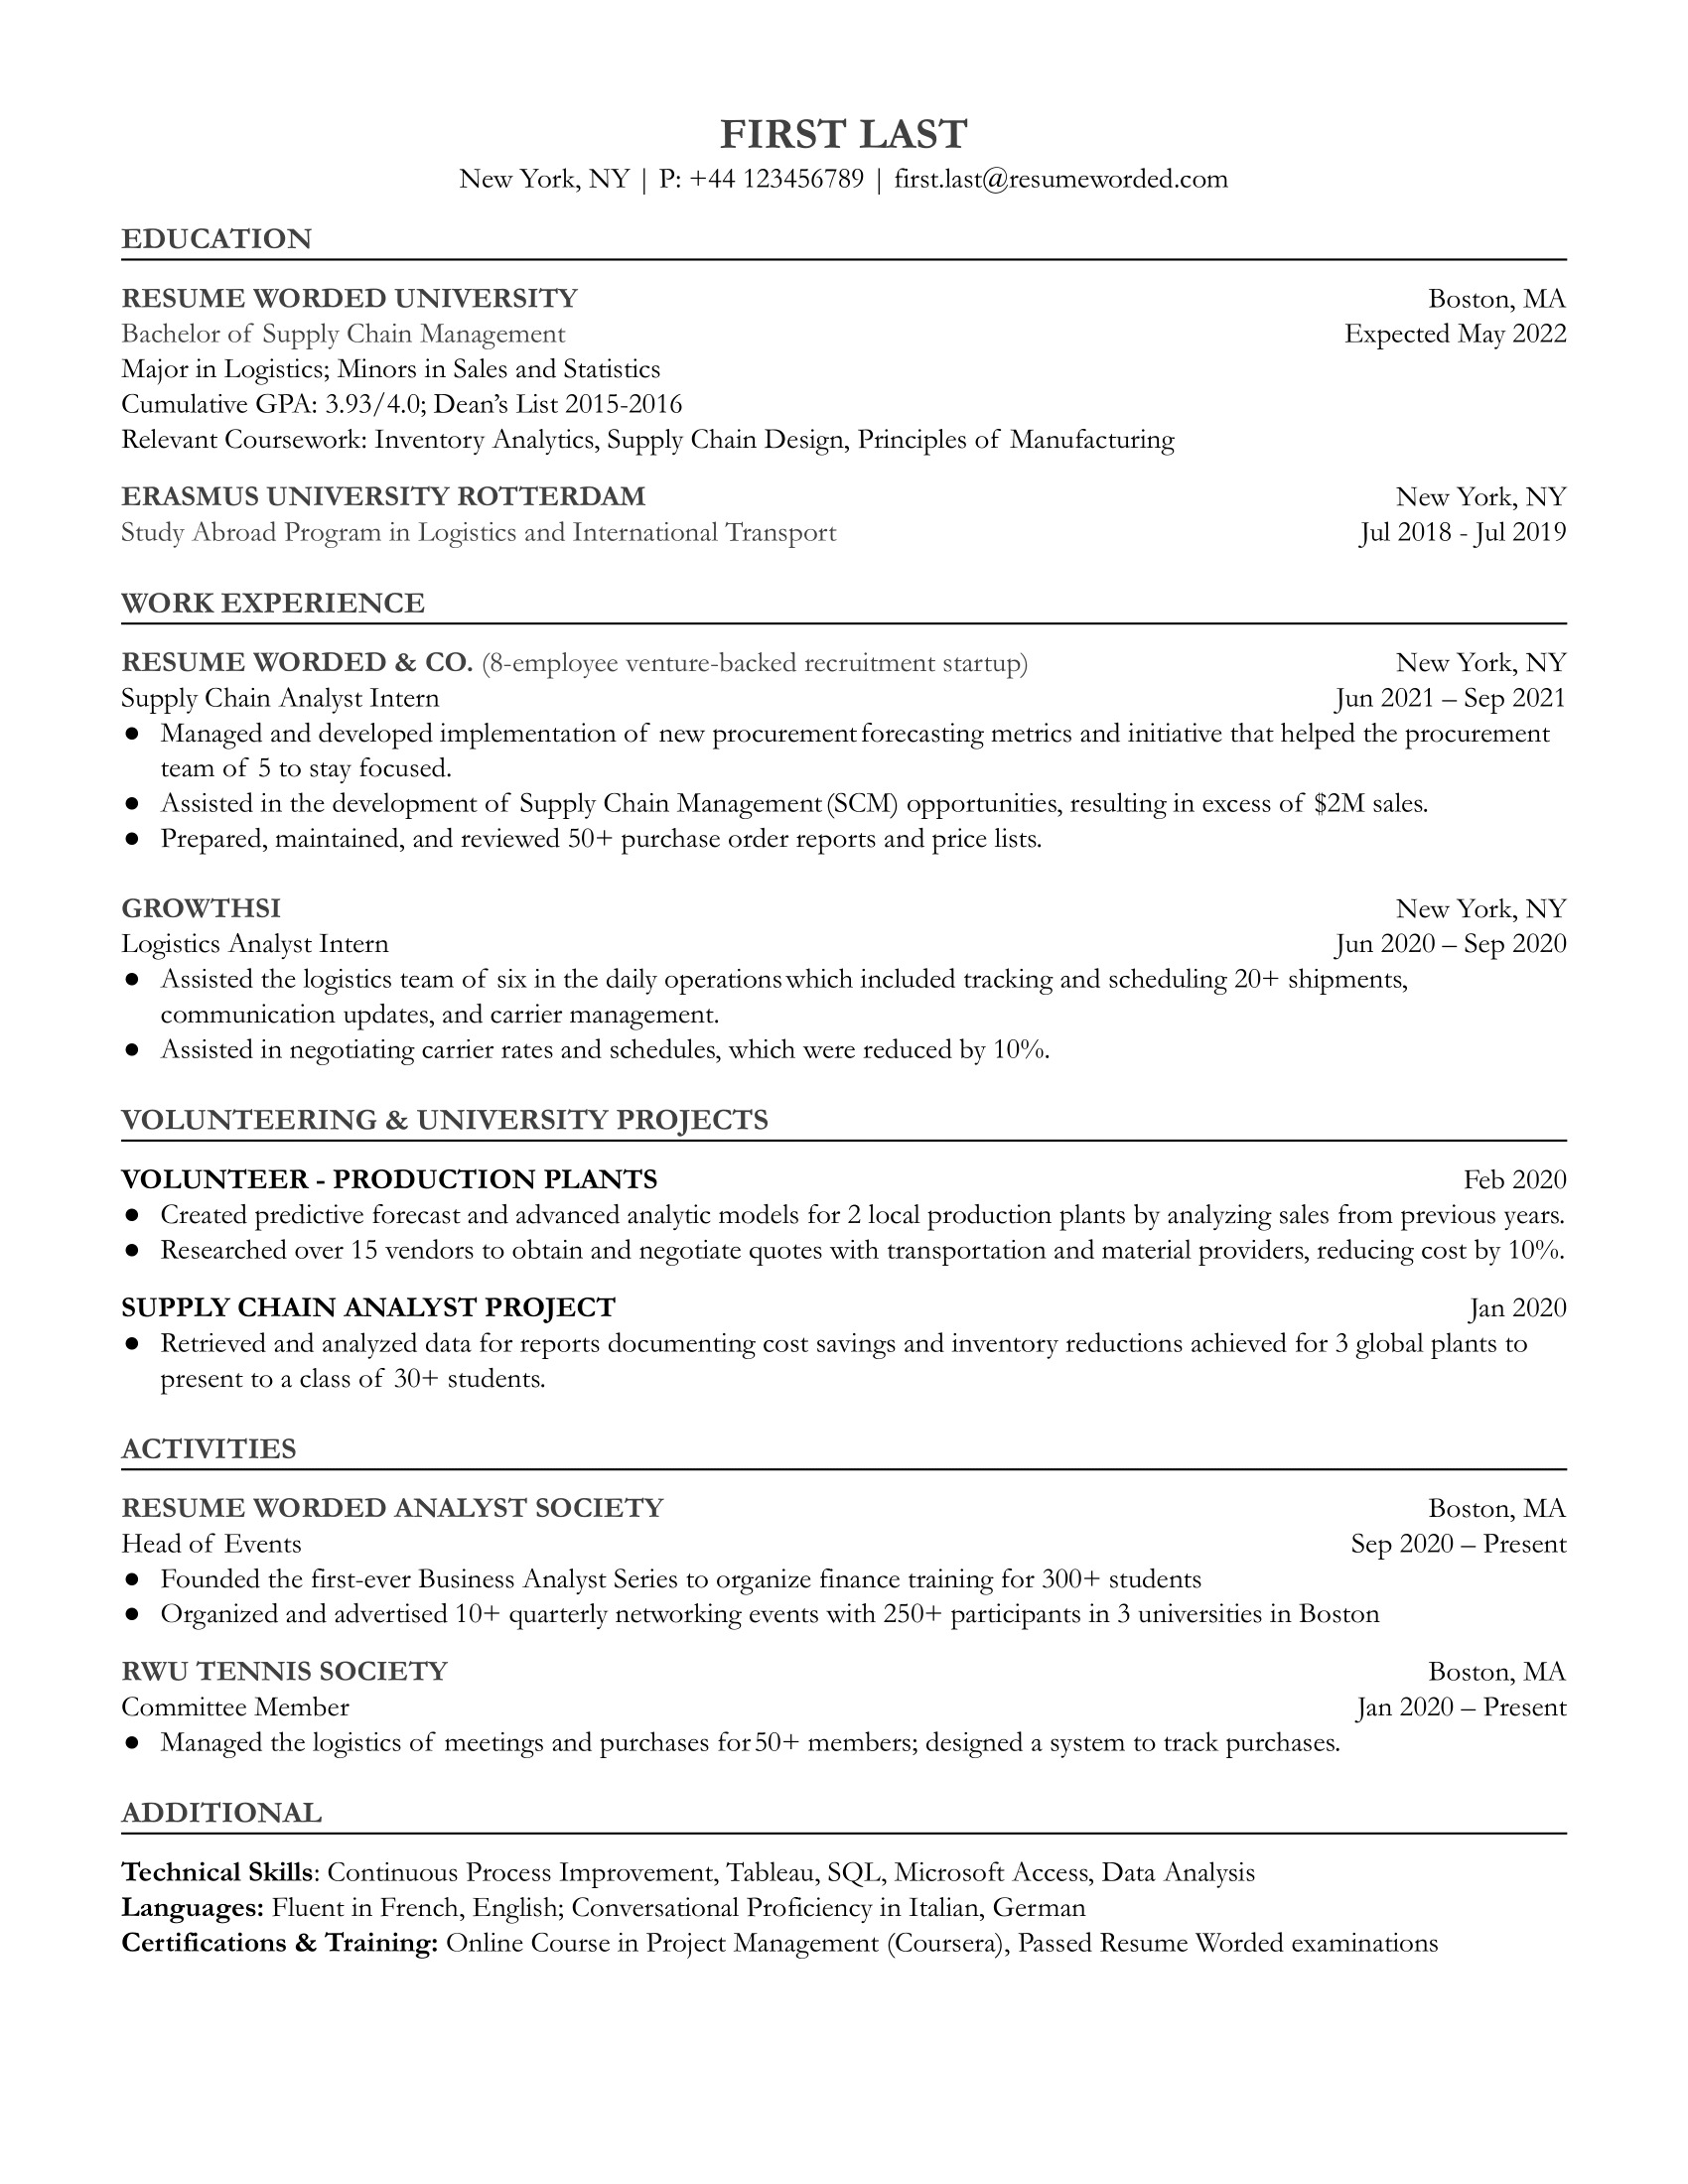 A screenshot of a resume for an entry level supply chain analyst role.